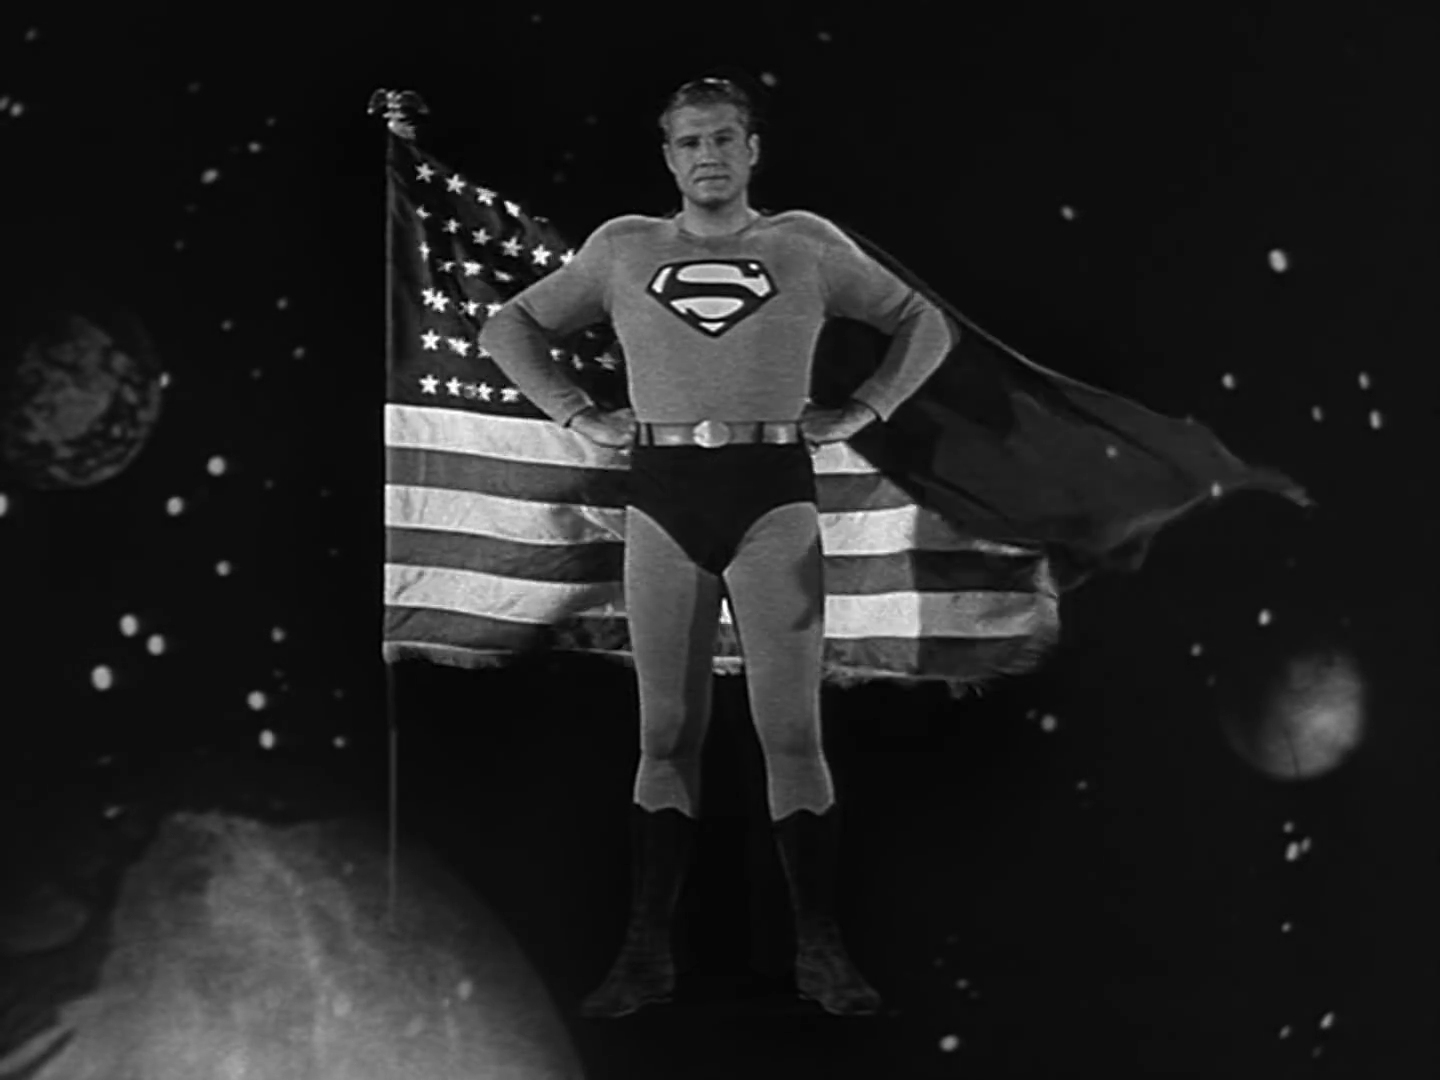 Superman standing in front of an American flag in the Adventures of Superman intro